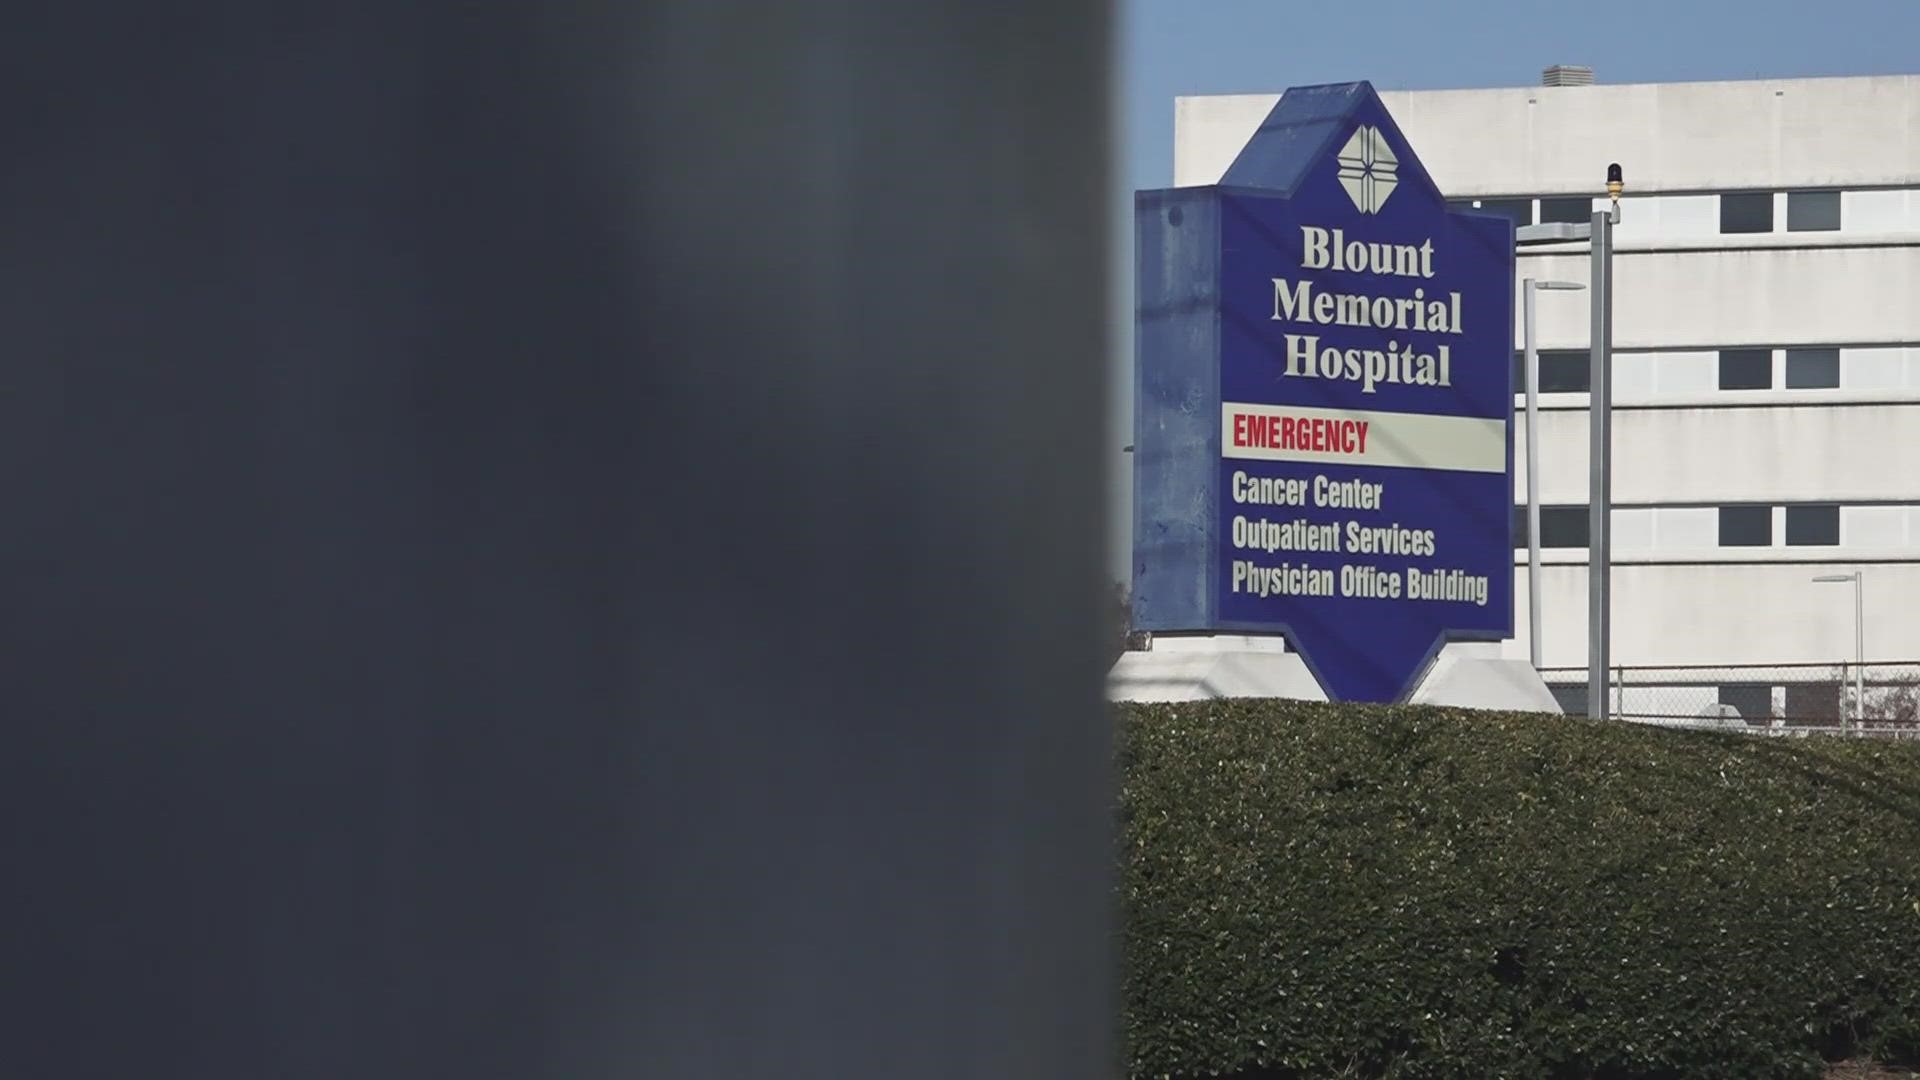 On Wednesday, the Blount County Mayor suggested UT Medical Center take over the operations of Blount Memorial Hospital.